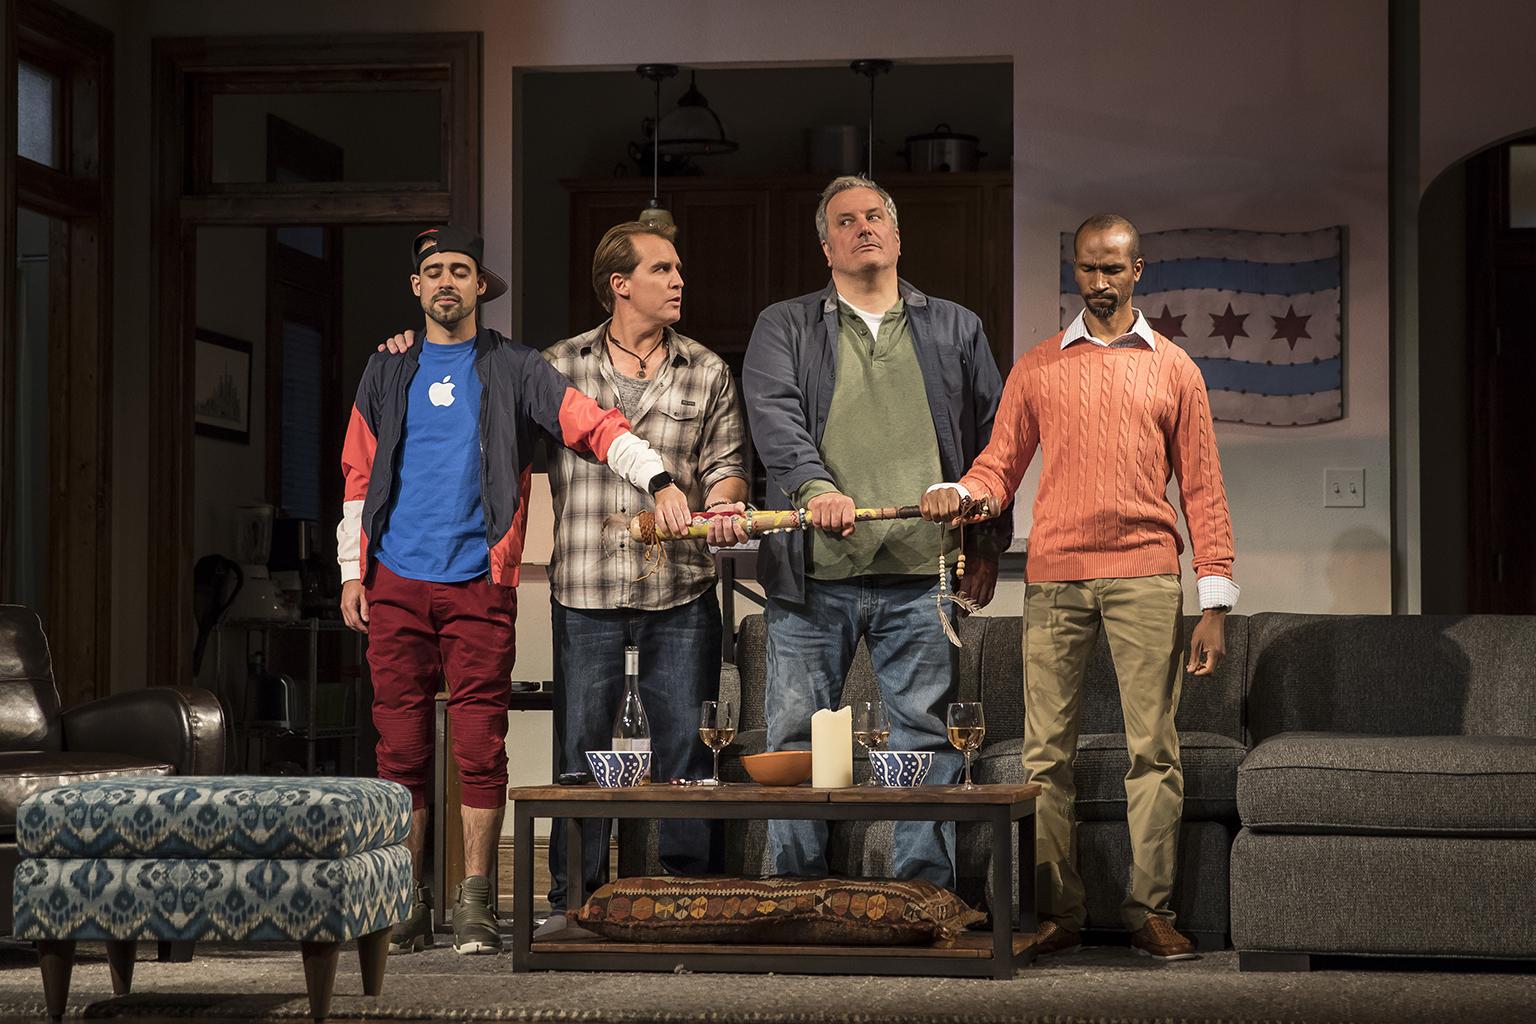 Tommy Rivera-Vega (Kevin), Ryan Kitley (Brian), Keith Kupferer (Roger) and Anthony Irons (Delano) in the world premiere of “Support Group for Men.” (Photo credit: Liz Lauren)